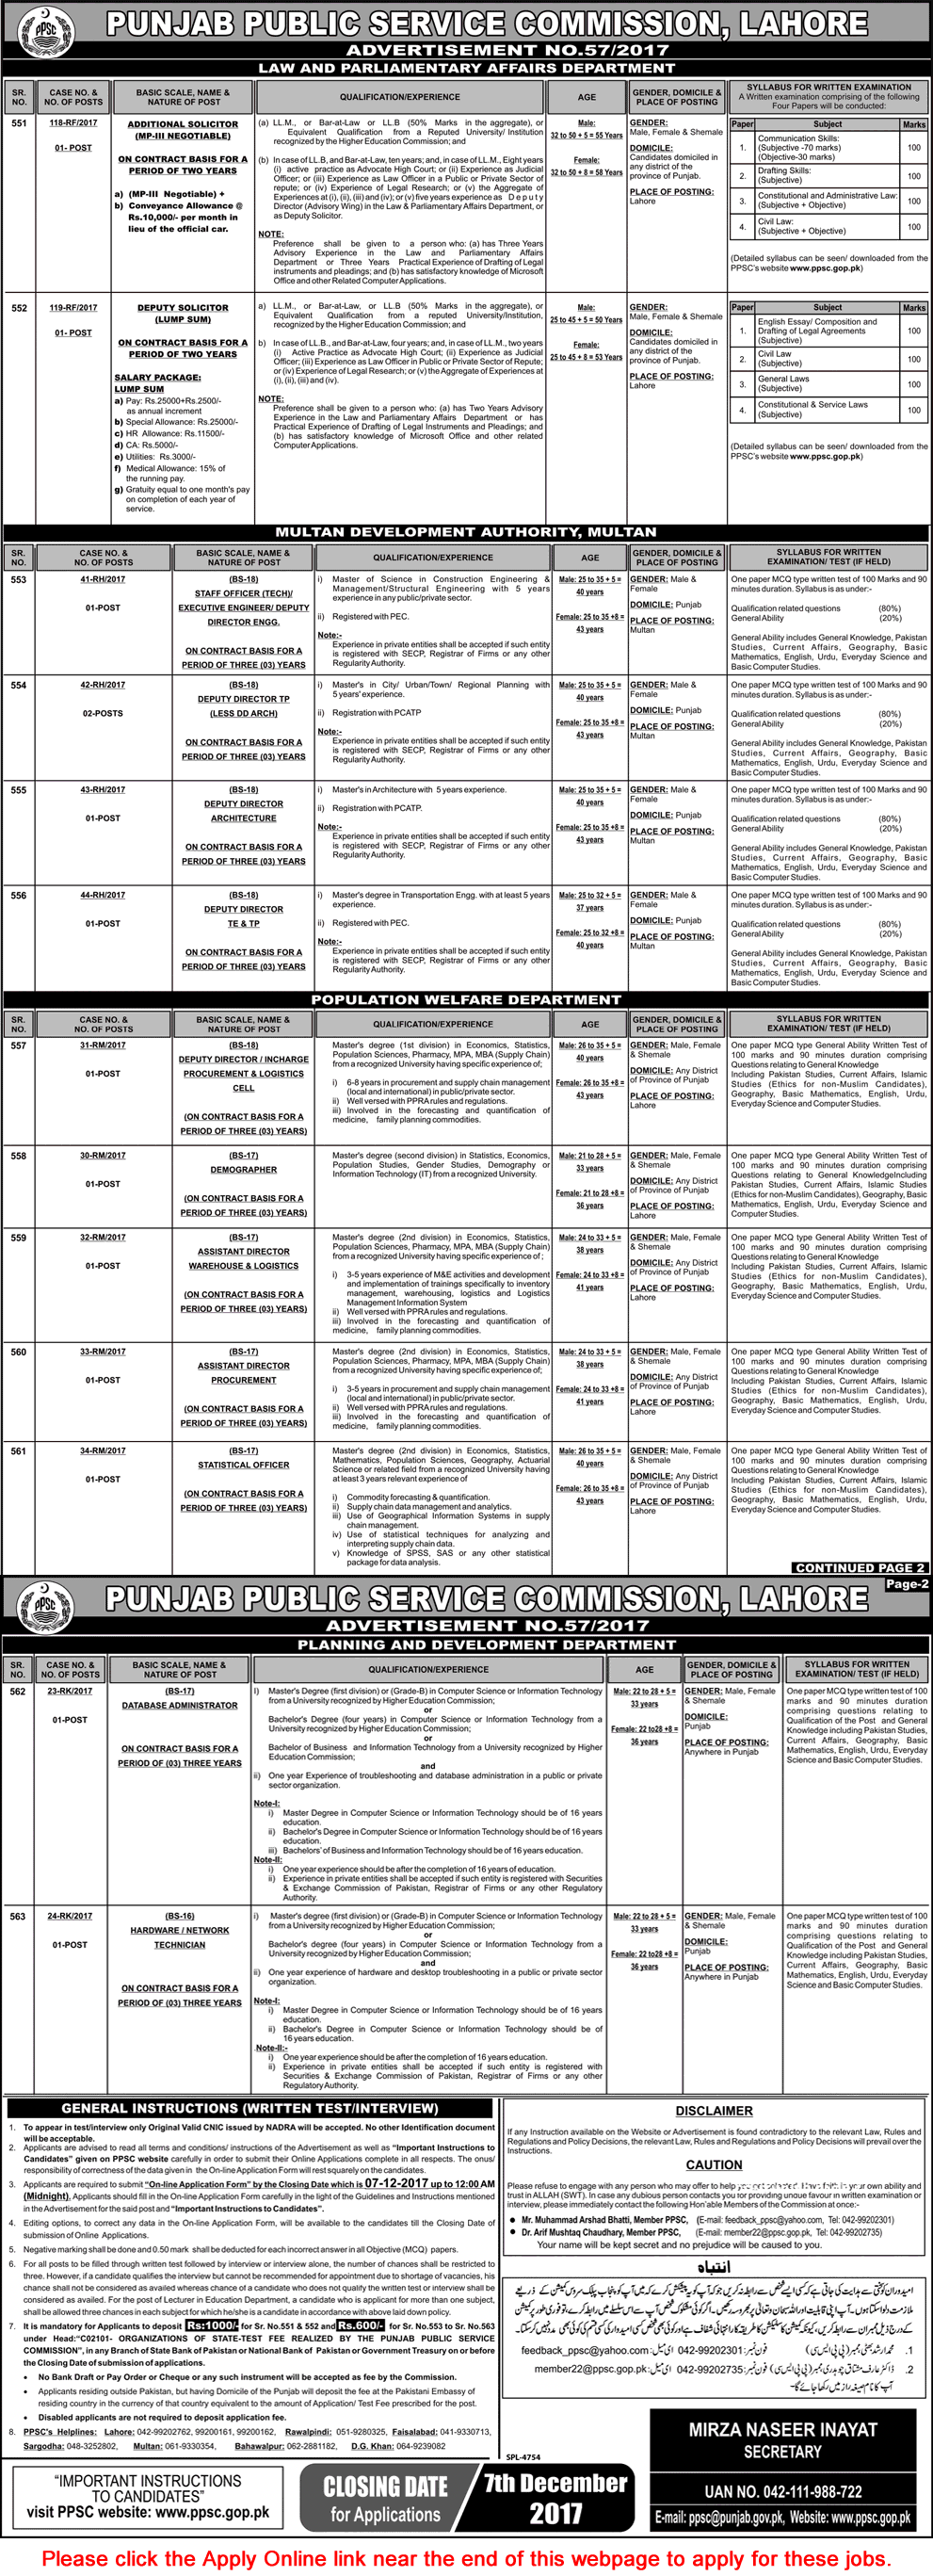 PPSC Jobs November 2017 Apply Online Consolidated Advertisement No 57/2017 Latest